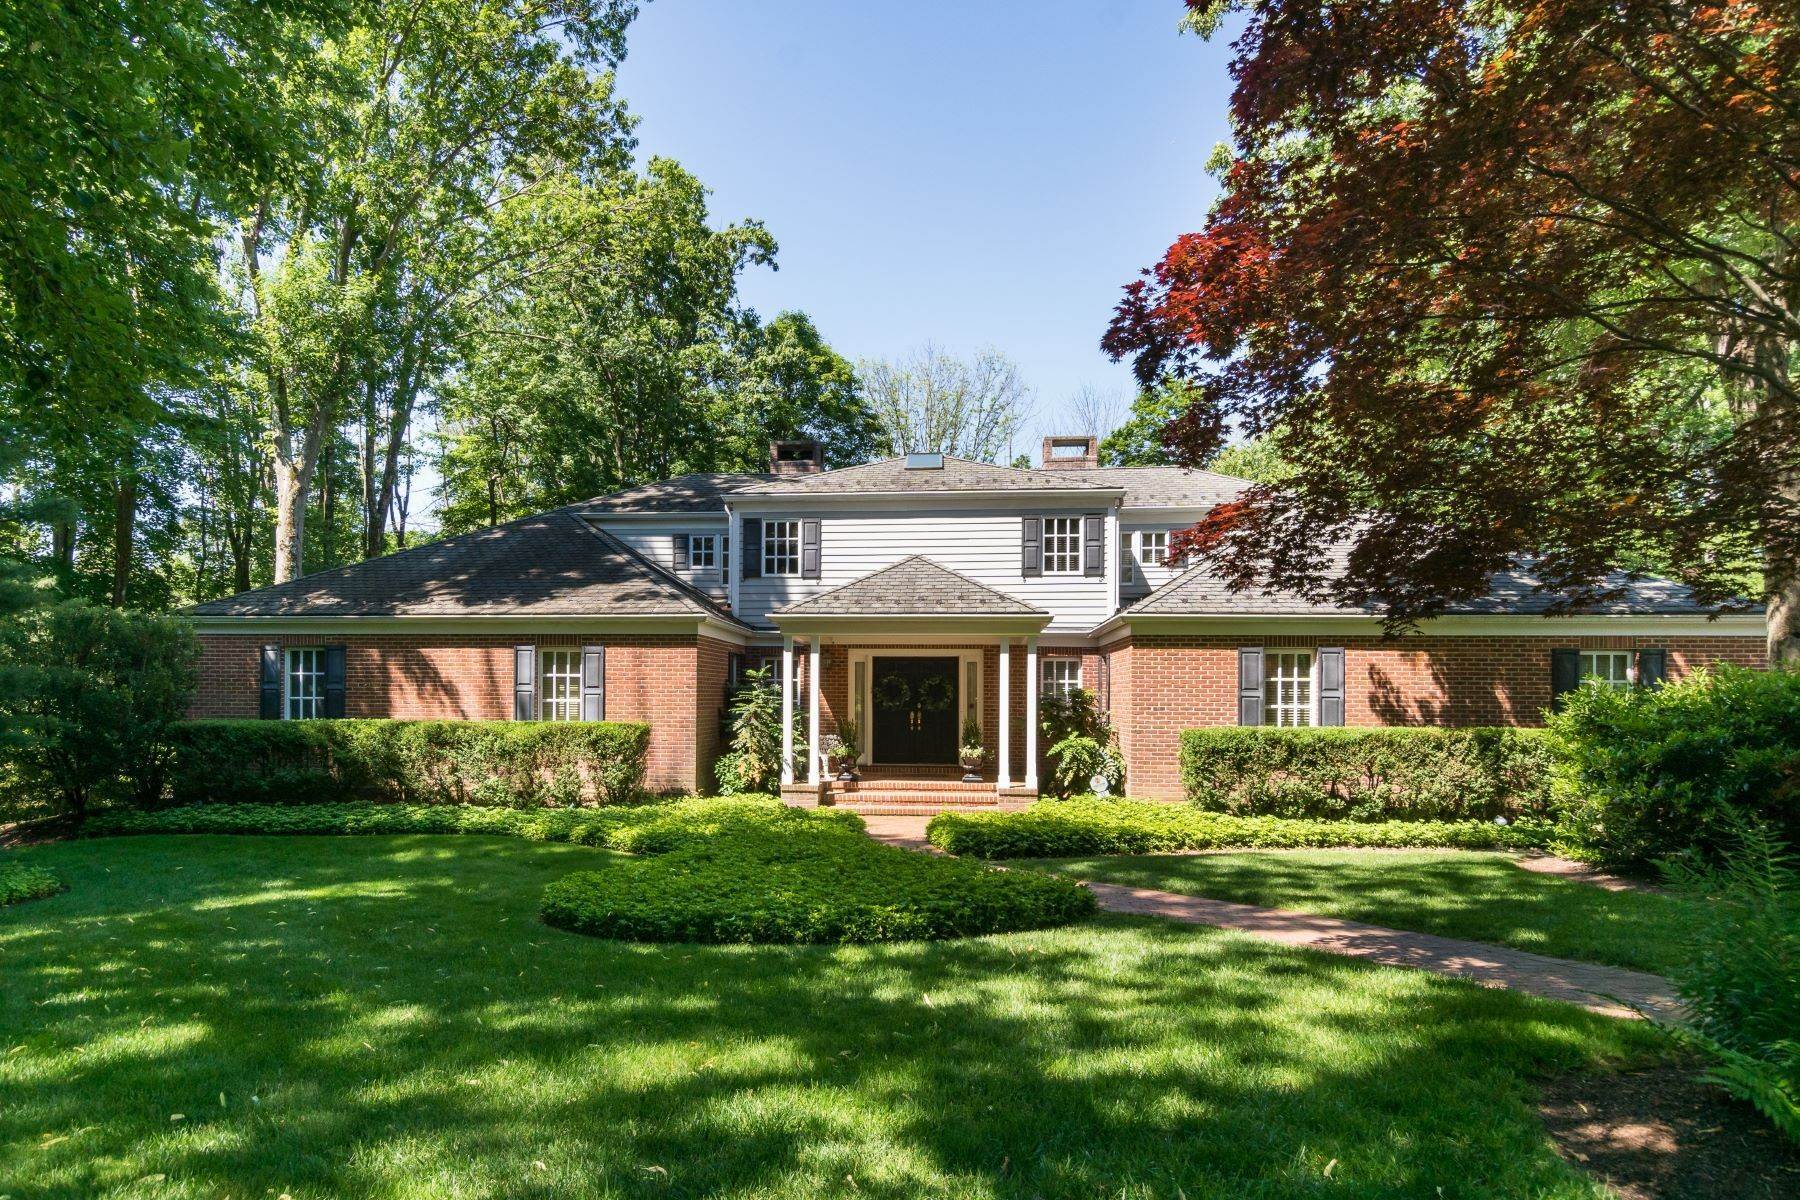 Single Family Homes for Sale at Stunning Renovations Elevate a Dramatic Home to New Heights 33 Brearly Road, Princeton, New Jersey 08540 United States